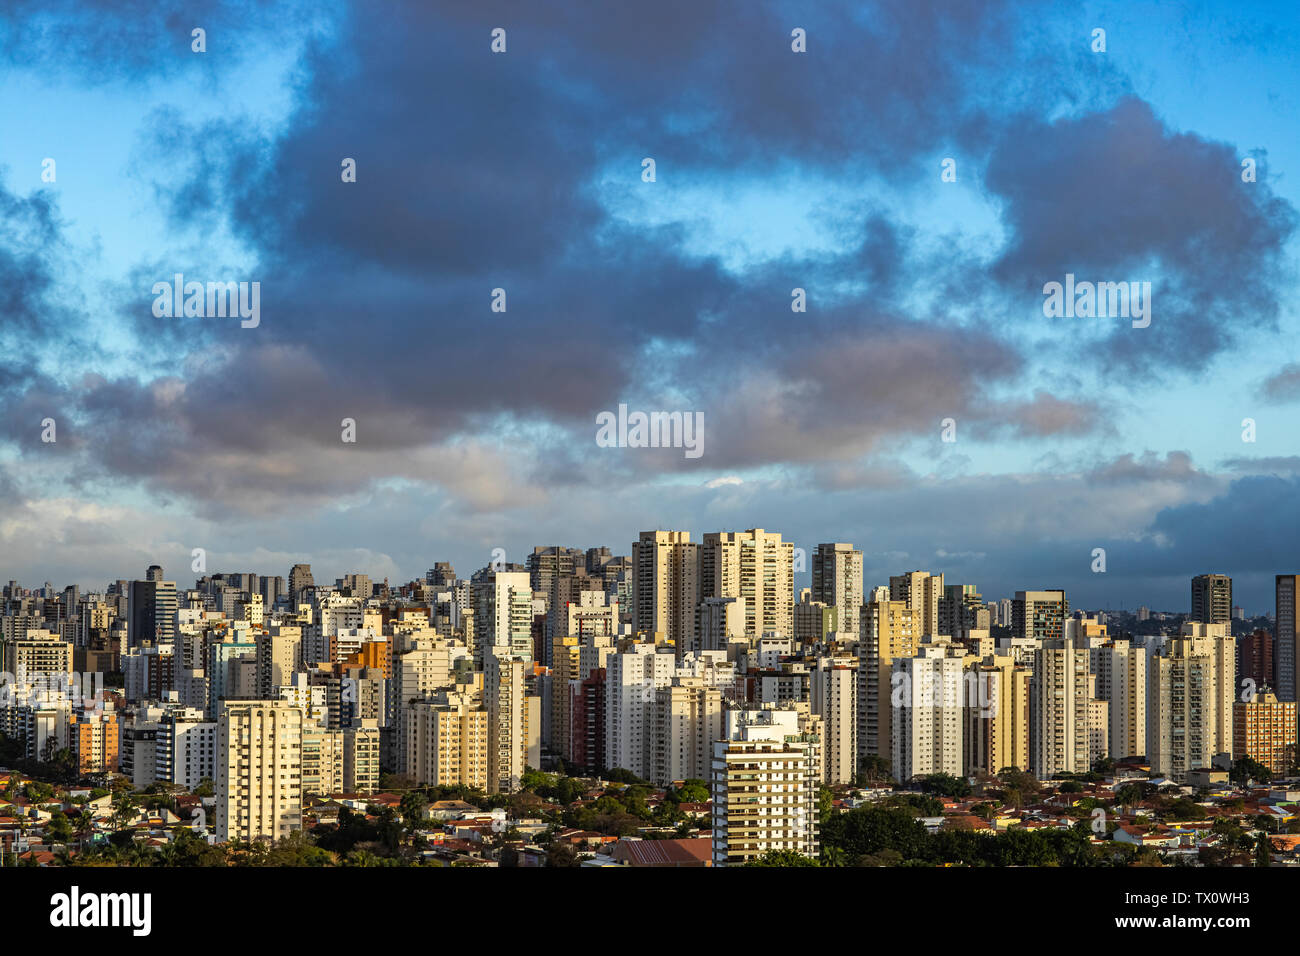 Building wall in the big city. Stock Photo